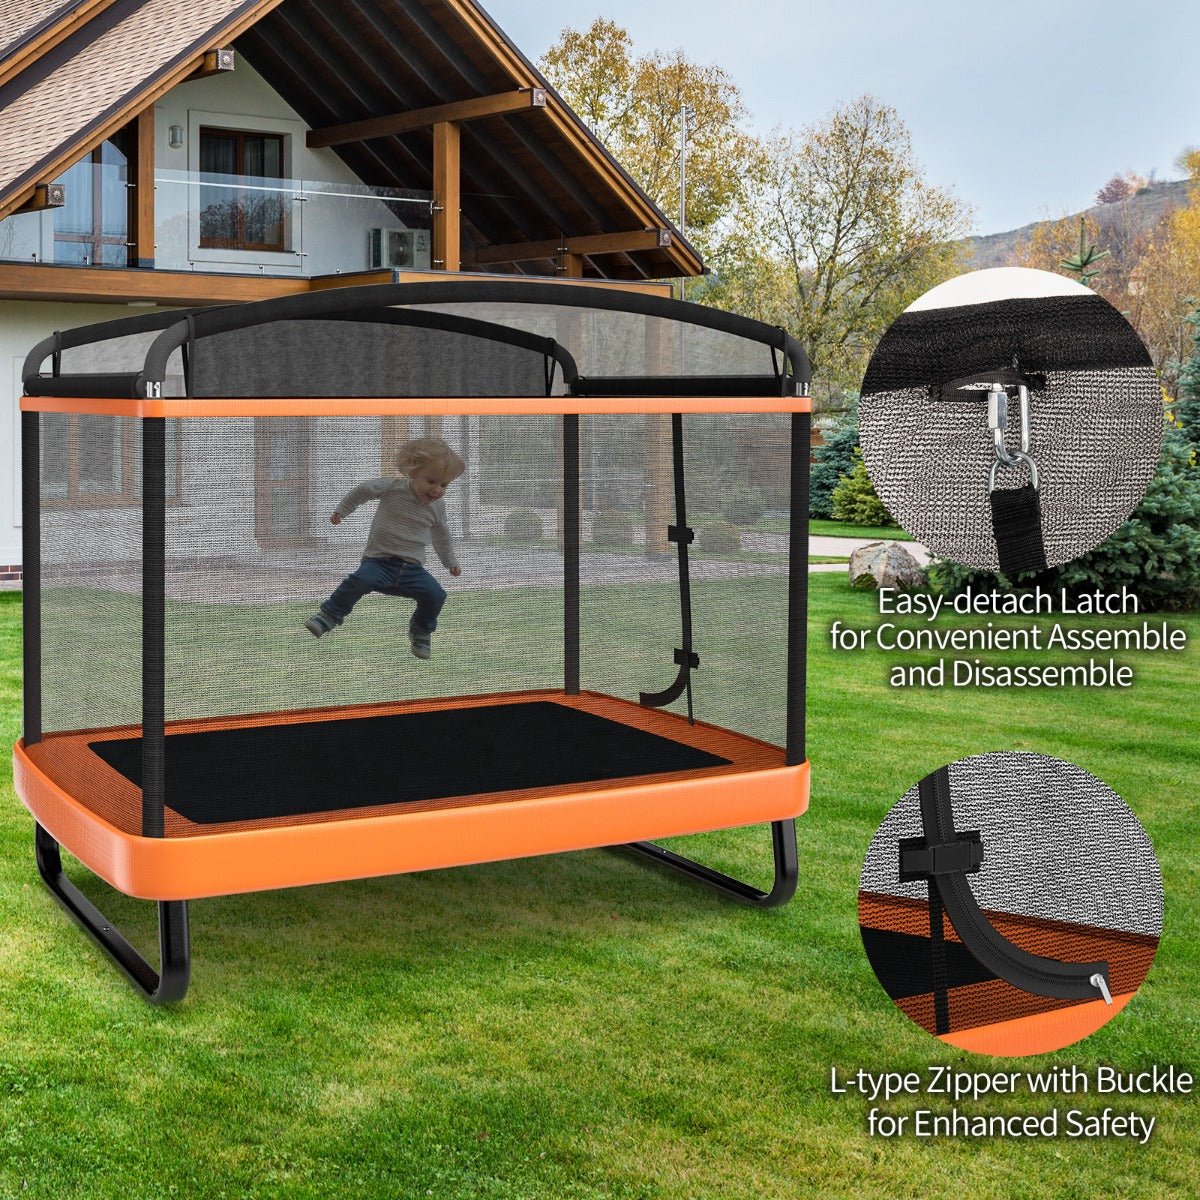 Playful Moments: Sturdy 6 FT Trampoline with Swing for Children's Fun